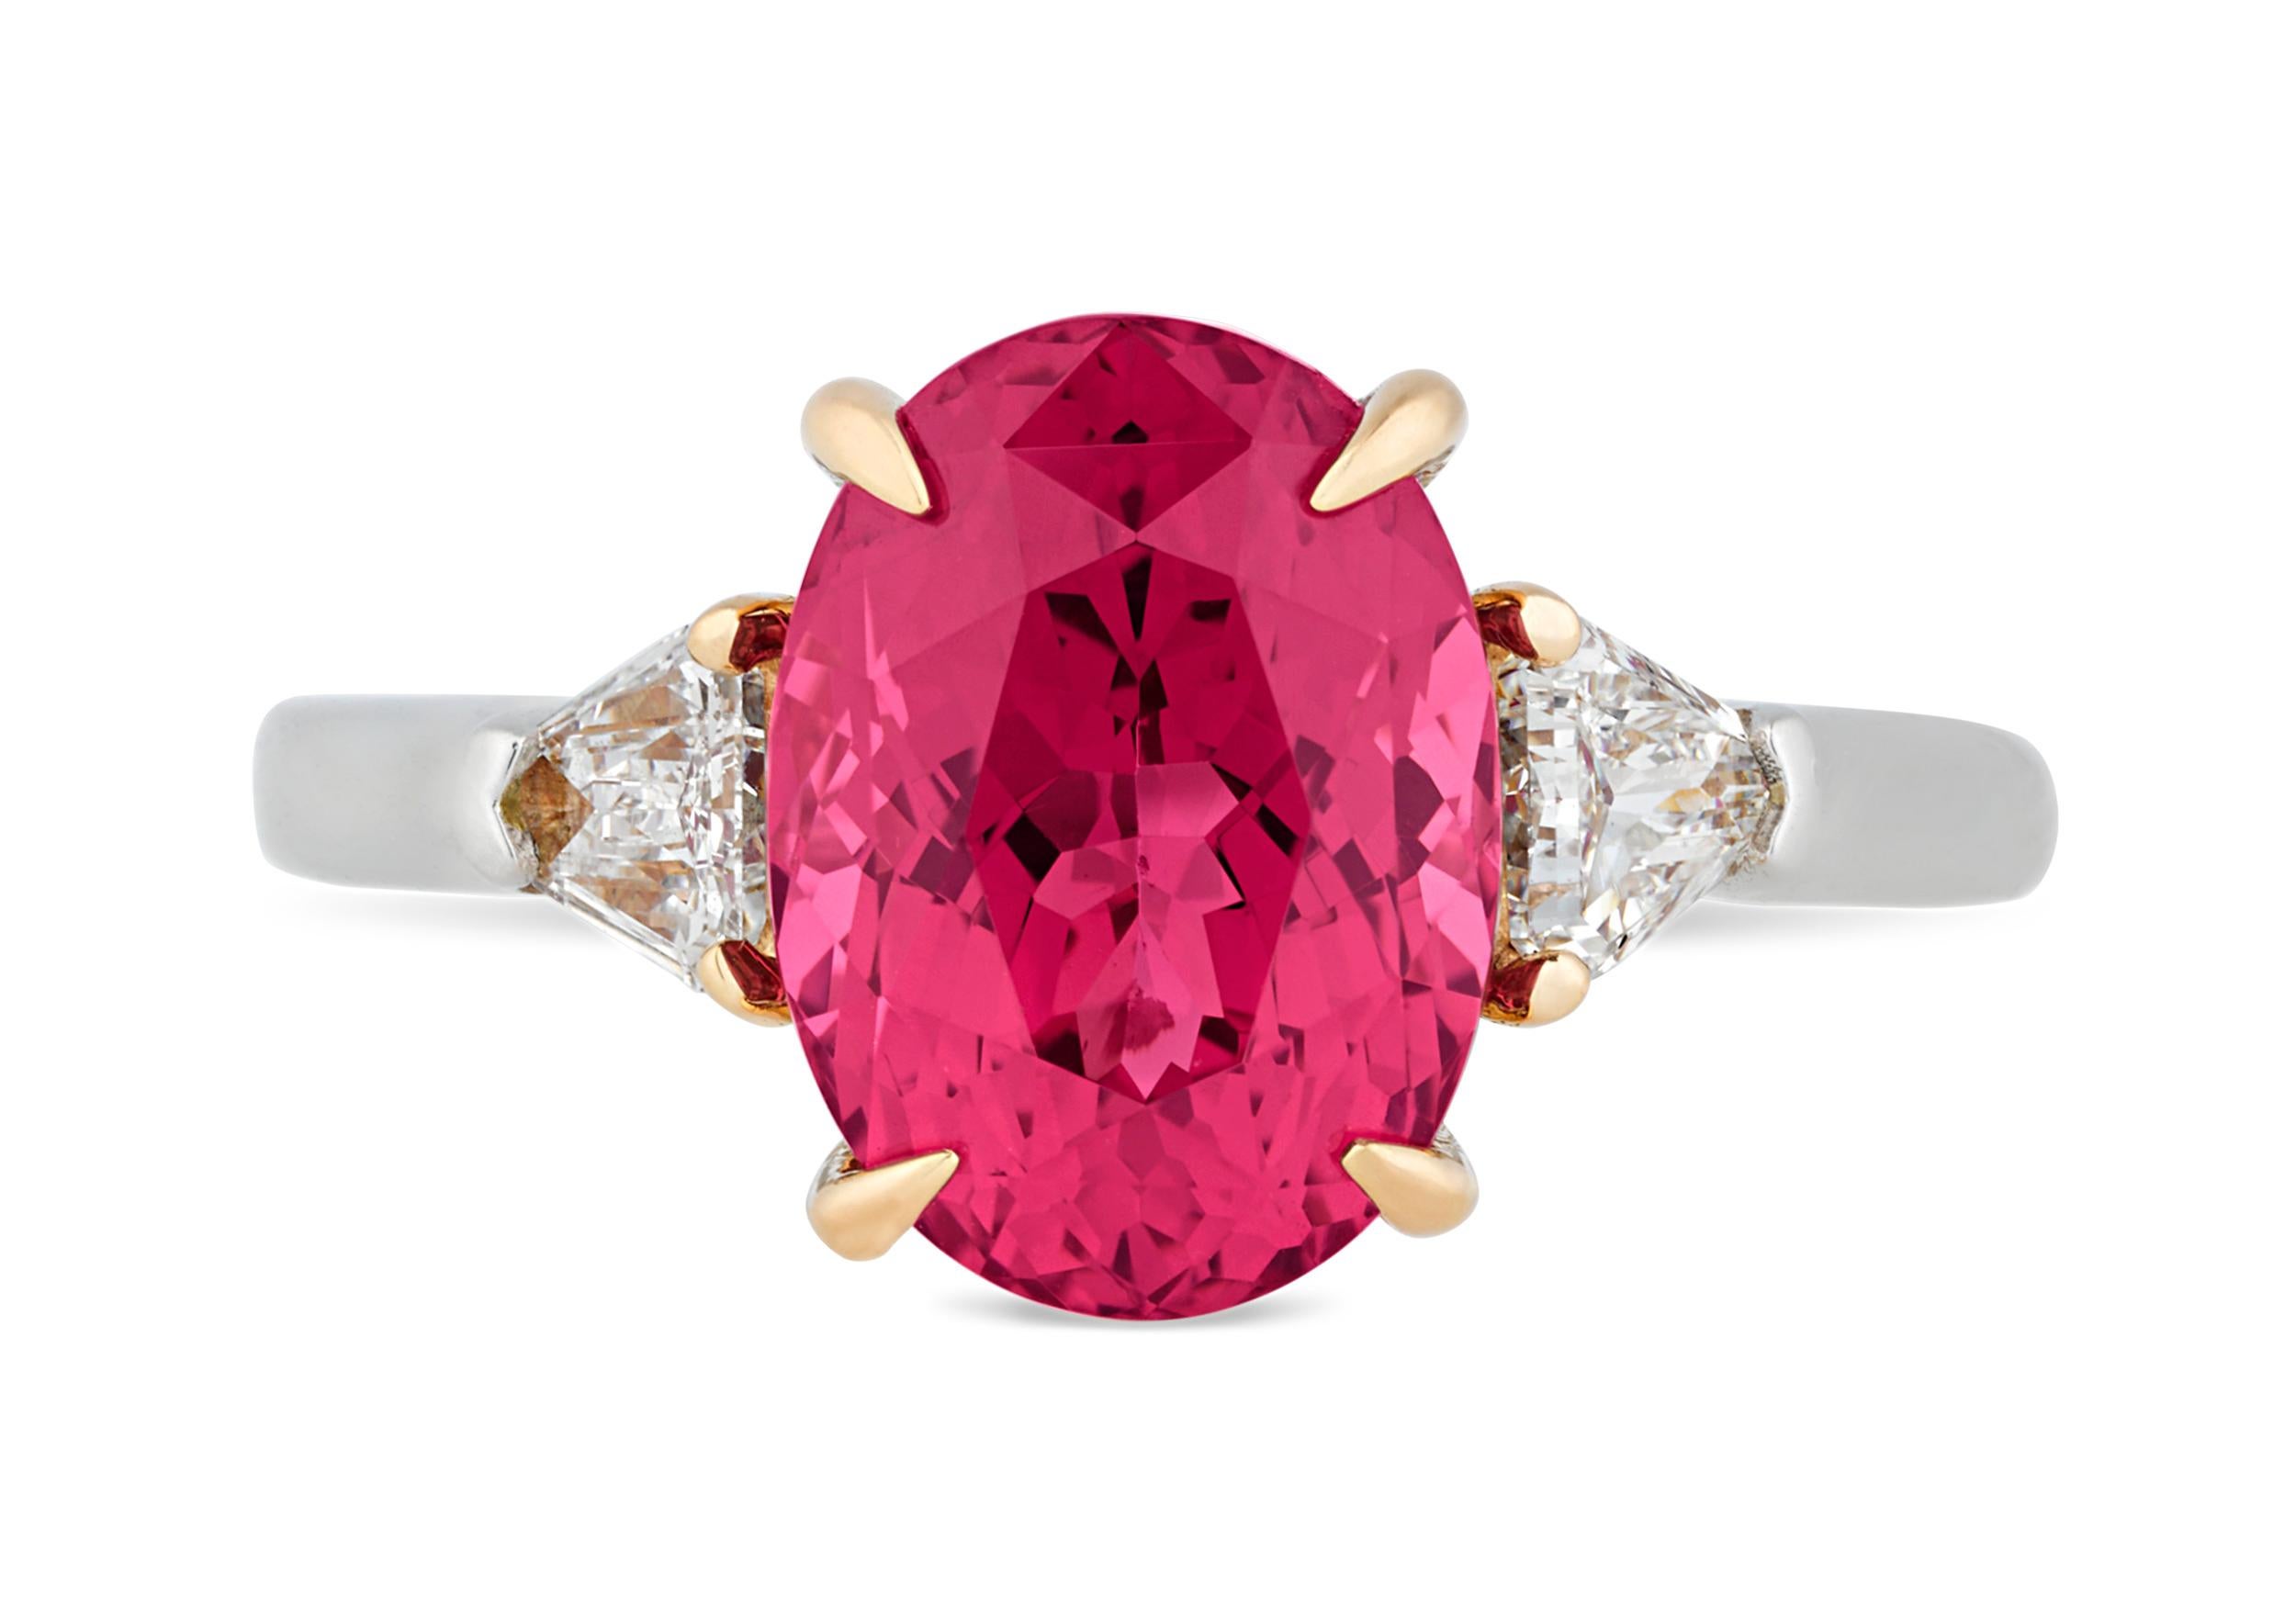 A sparkling red spinel captivates the eye in this ring. Exhibiting a deep crimson color, this 4.07-carat jewel is set in platinum and 18K rose gold between two shield-cut diamonds totaling 0.39 carat. Though often mistaken for rubies or sapphires,